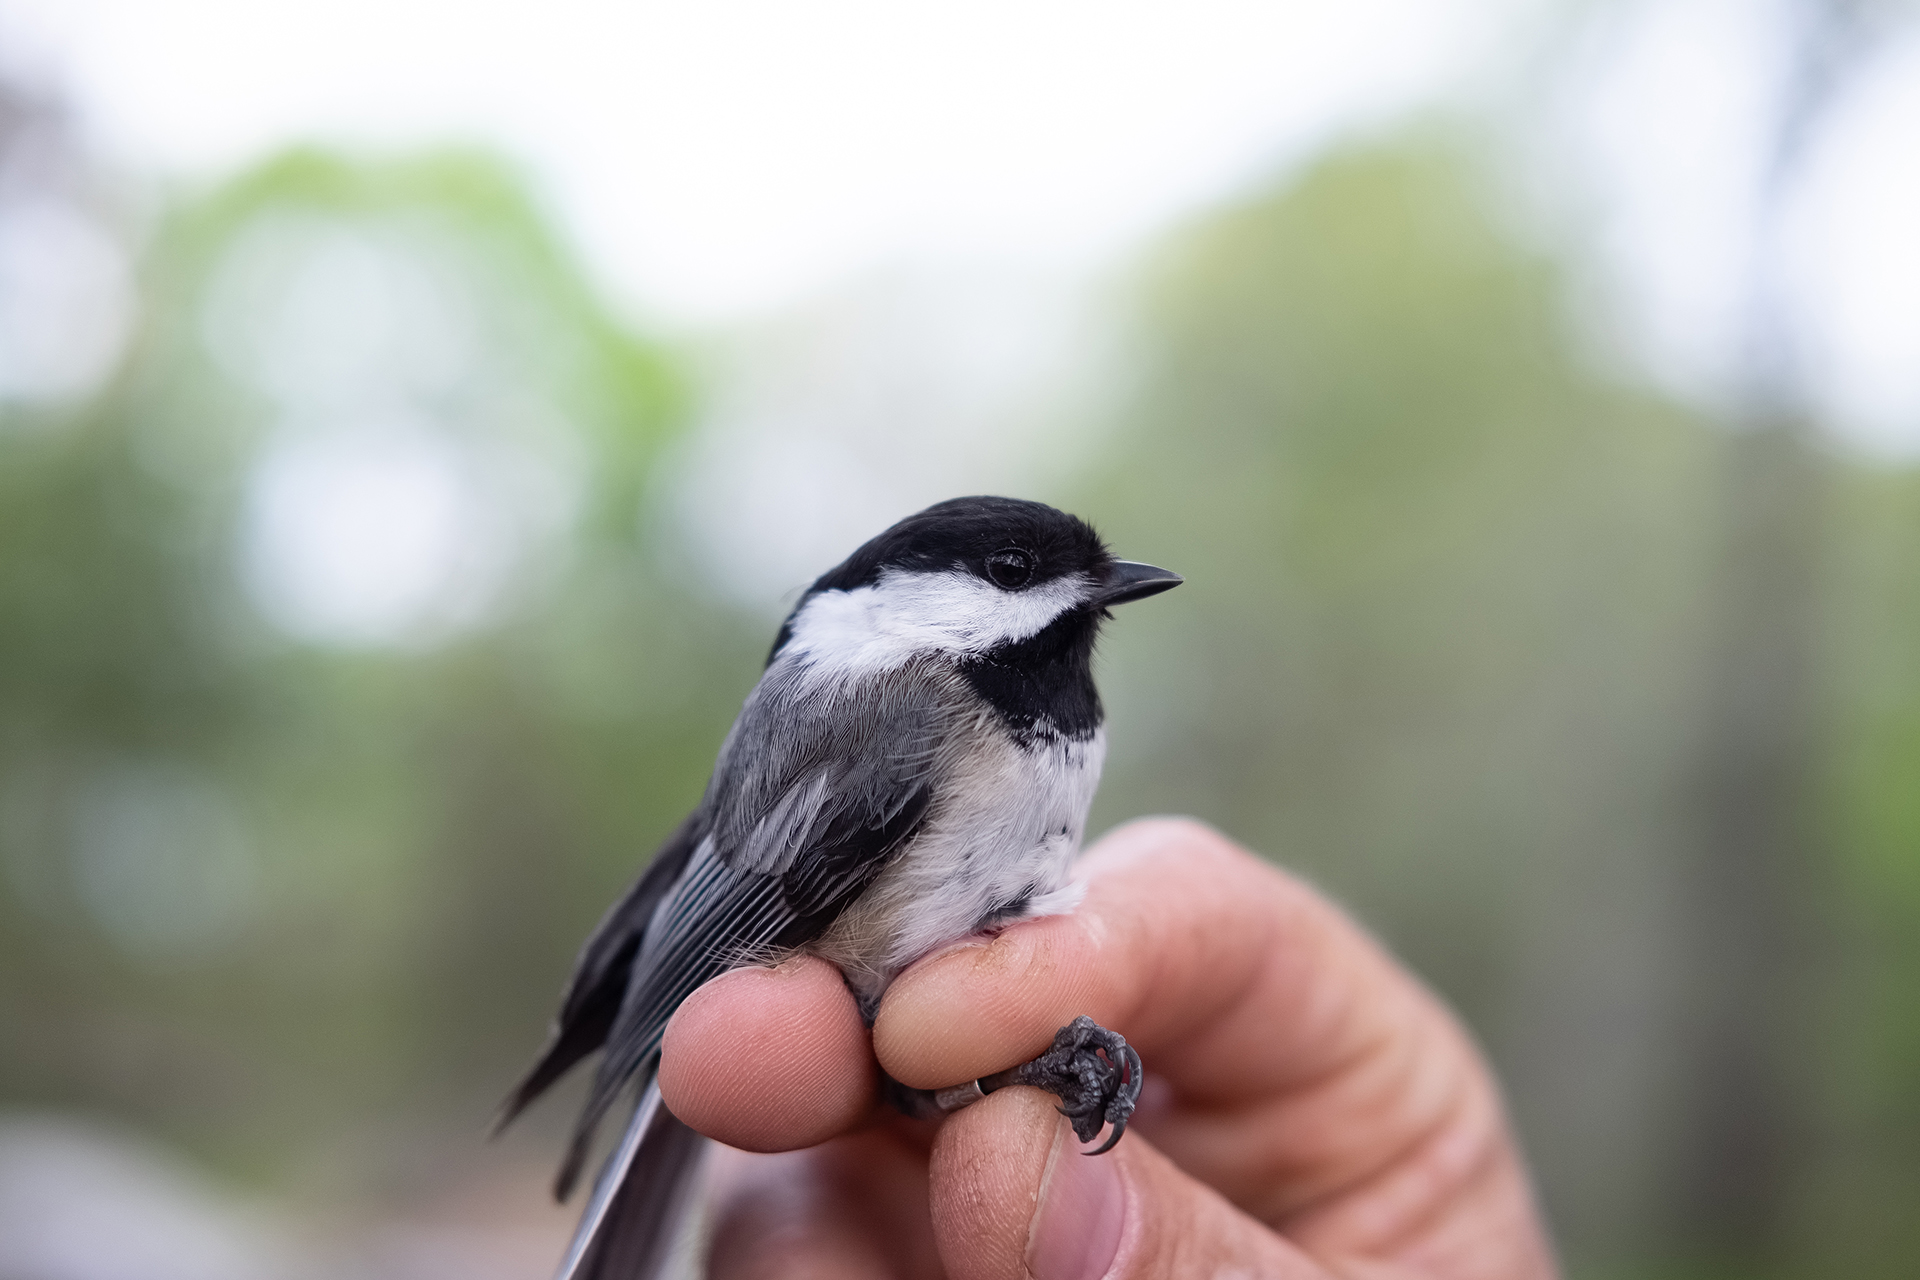 Black-capped chickadee held in a person's fingers